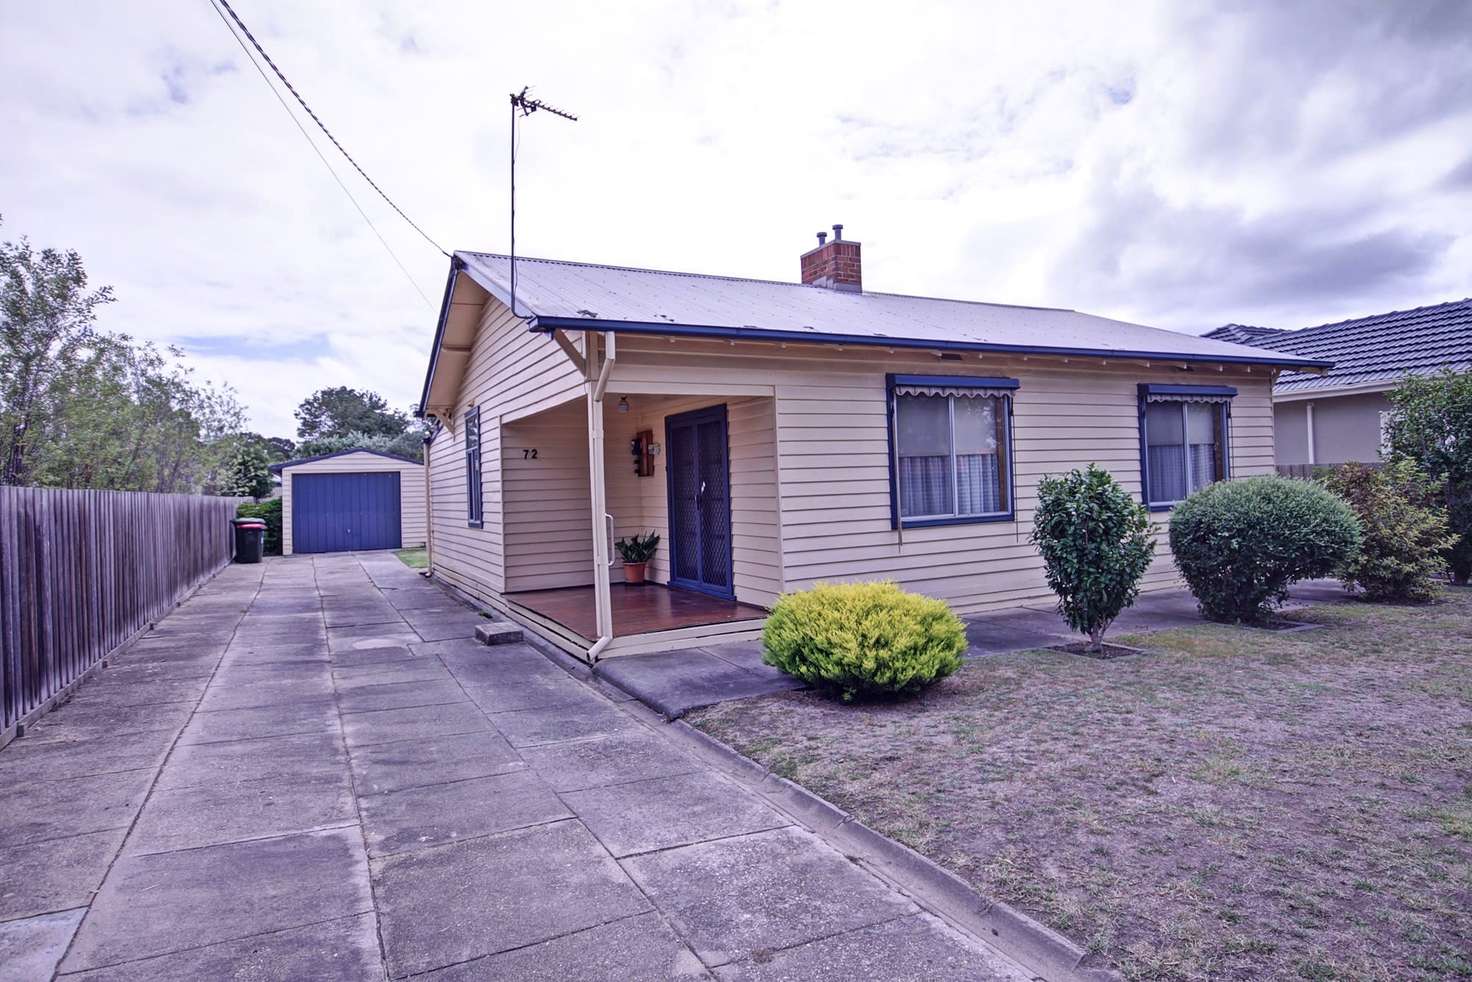 Main view of Homely house listing, 72 Goold St, Bairnsdale VIC 3875